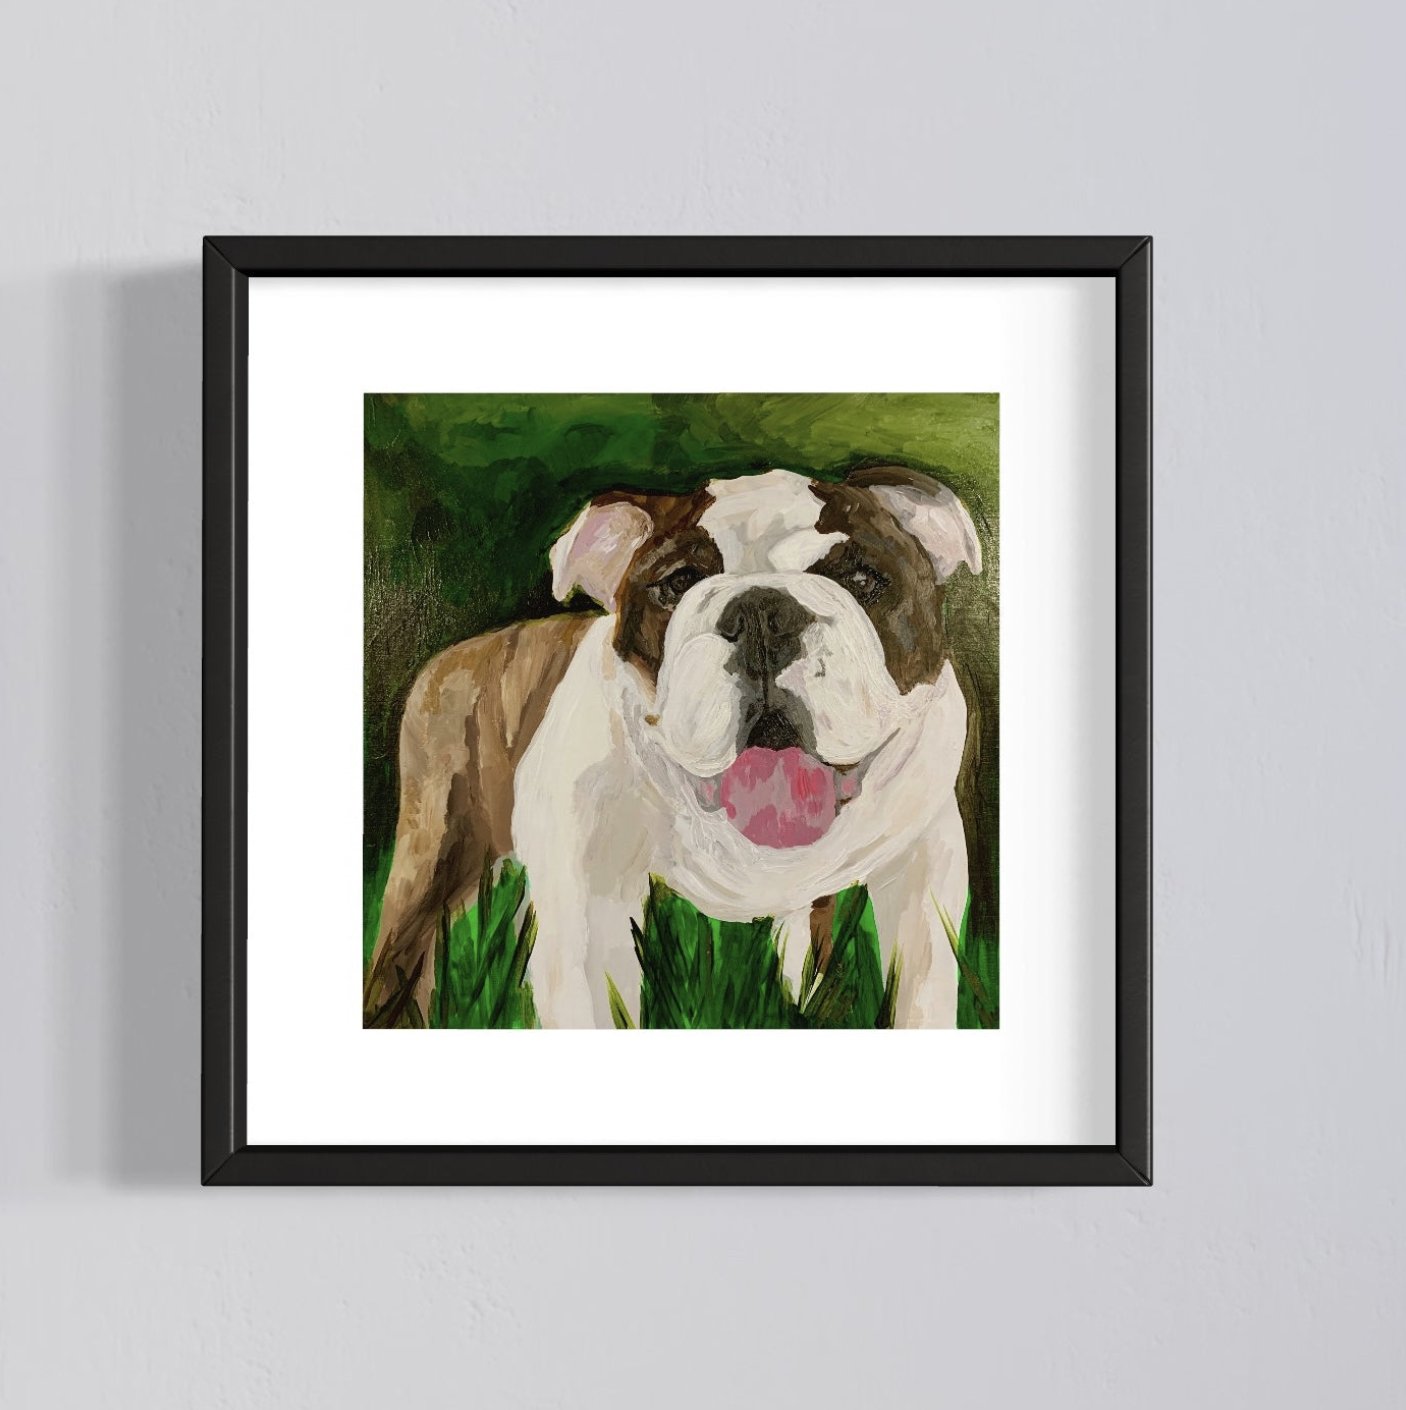 Painting of a bulldog standing in grass. 